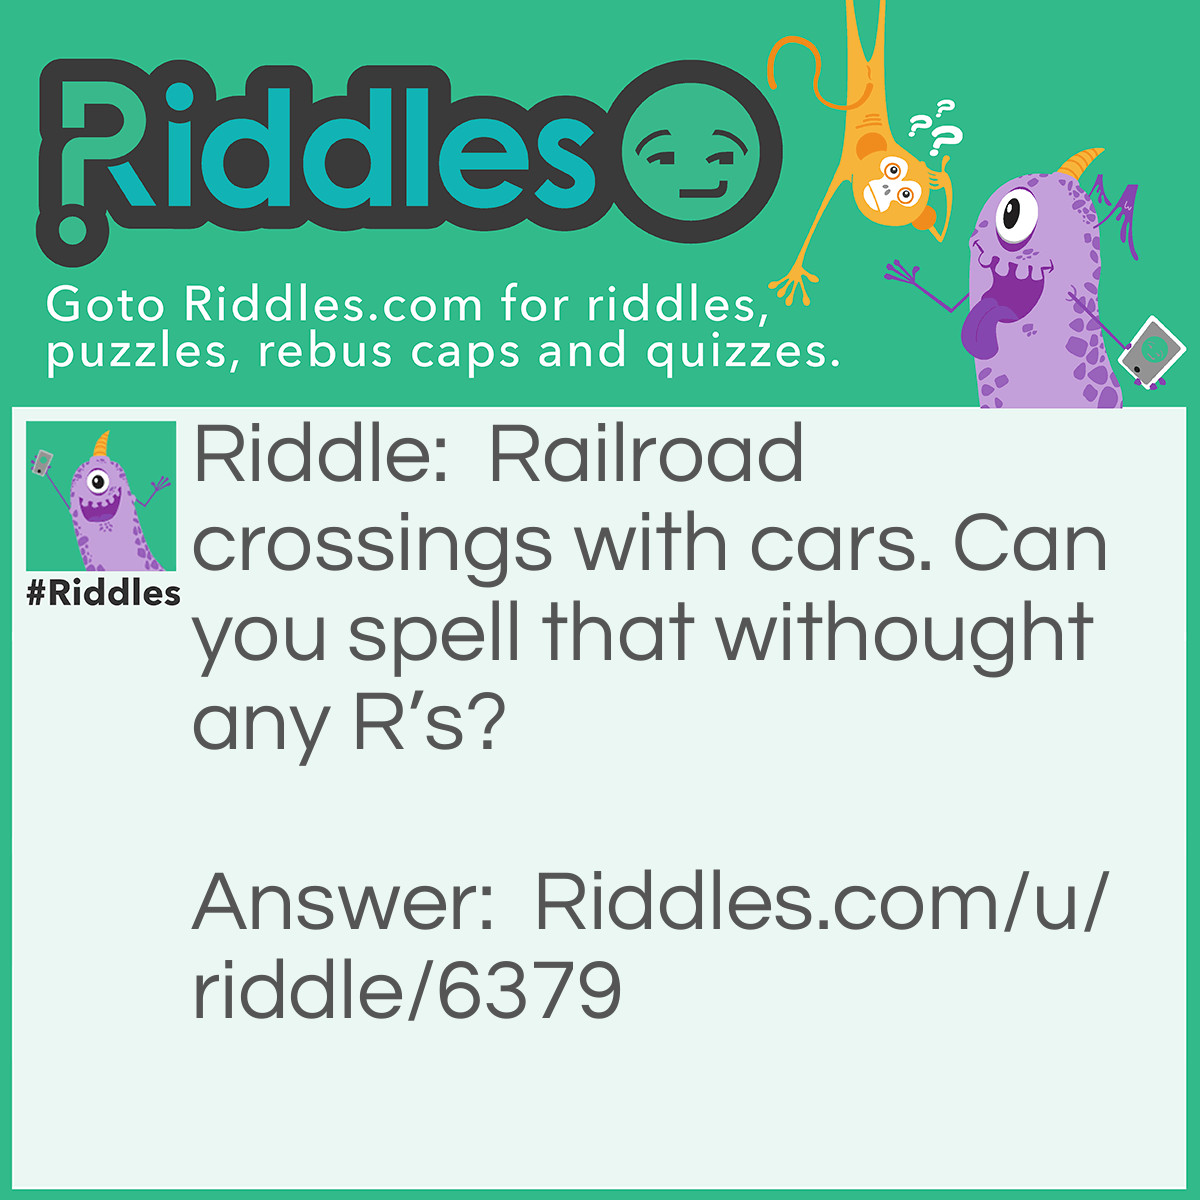 Riddle: Railroad crossings with cars. Can you spell that withought any R's? Answer: T-H-A-T